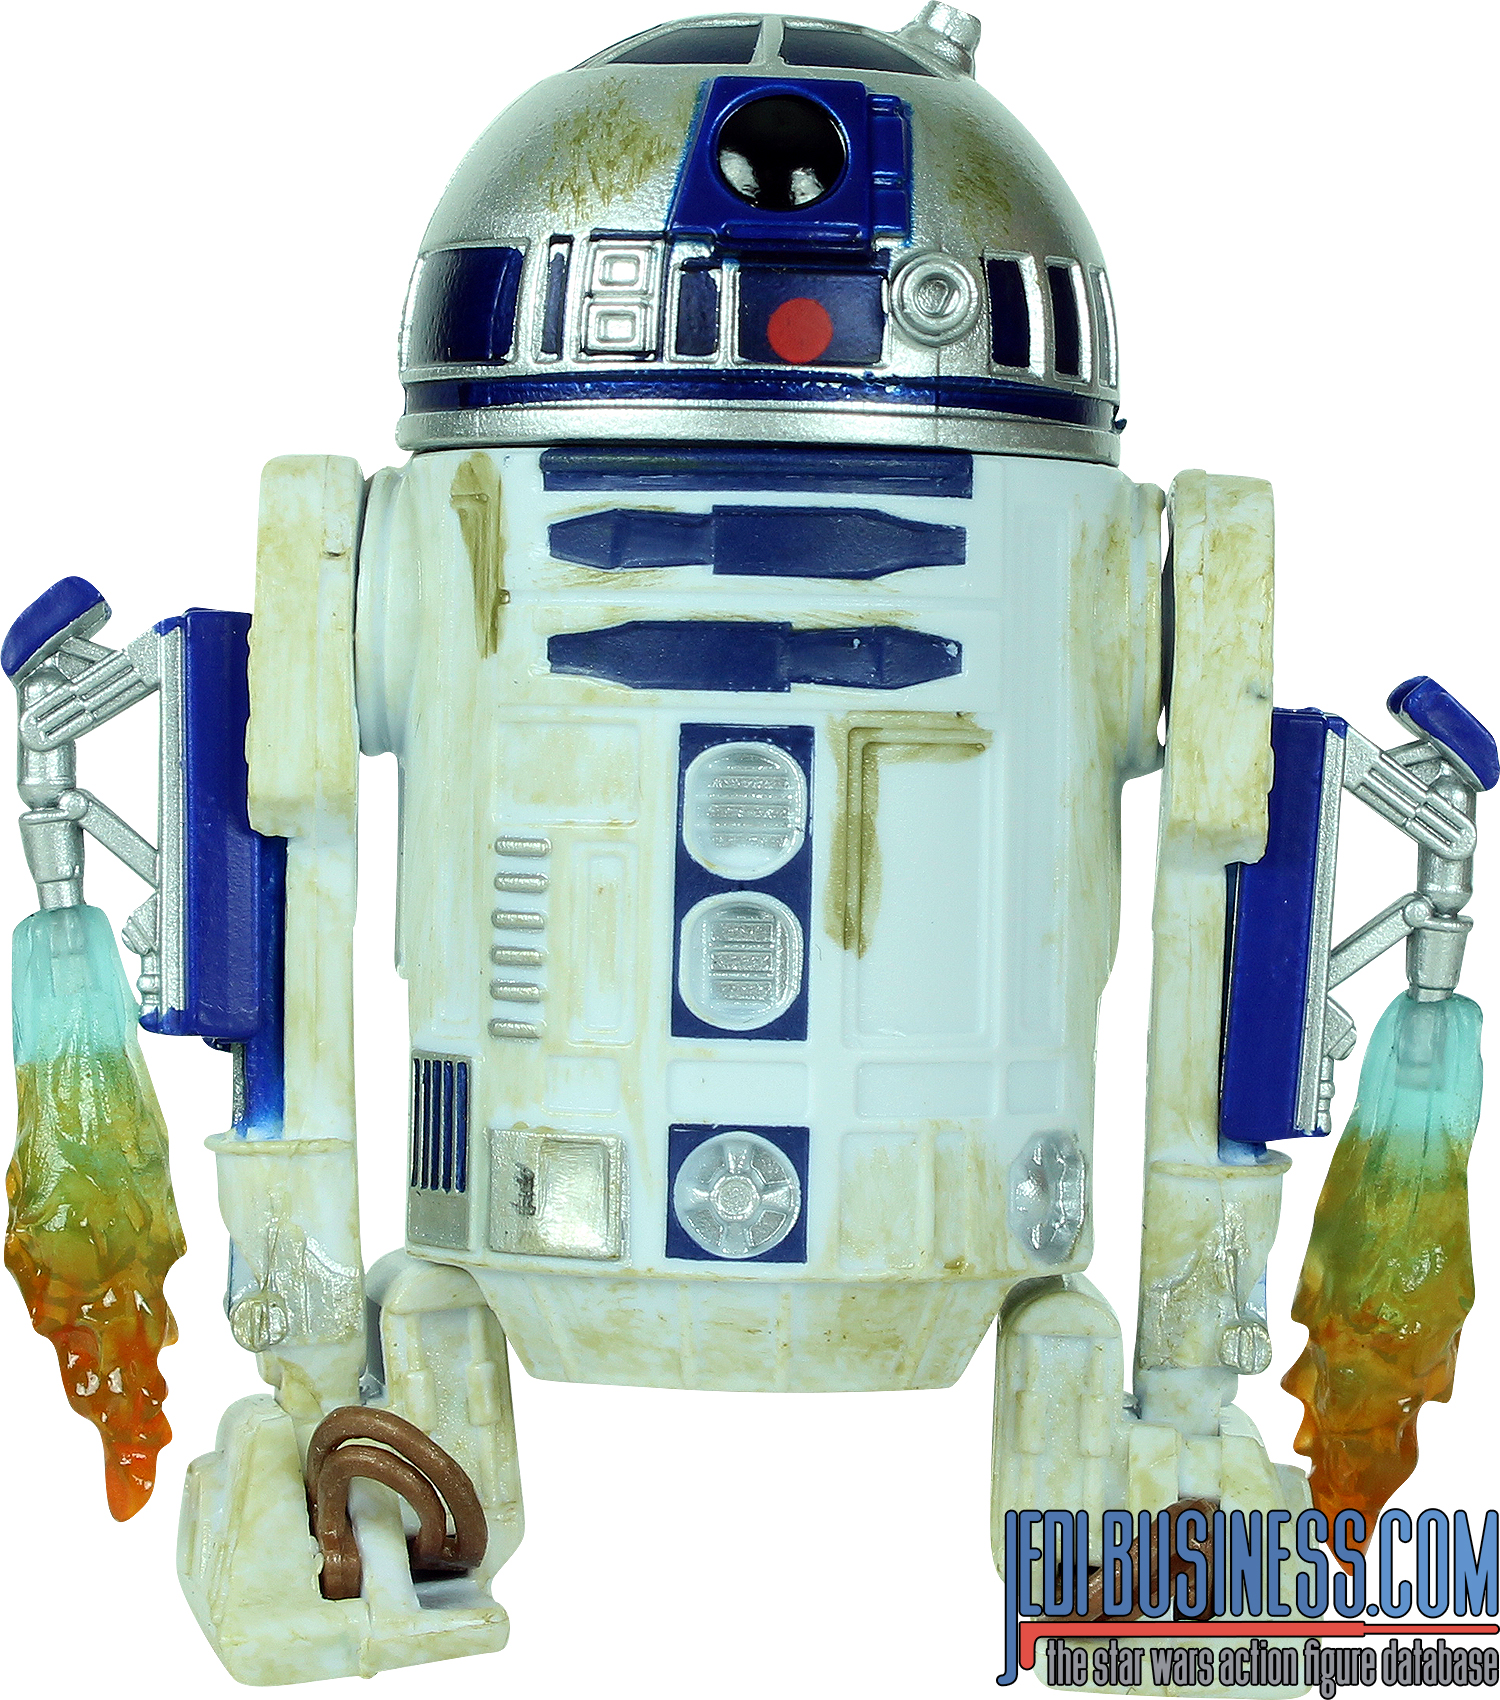 R2-D2 2-Pack #6 With C-3PO